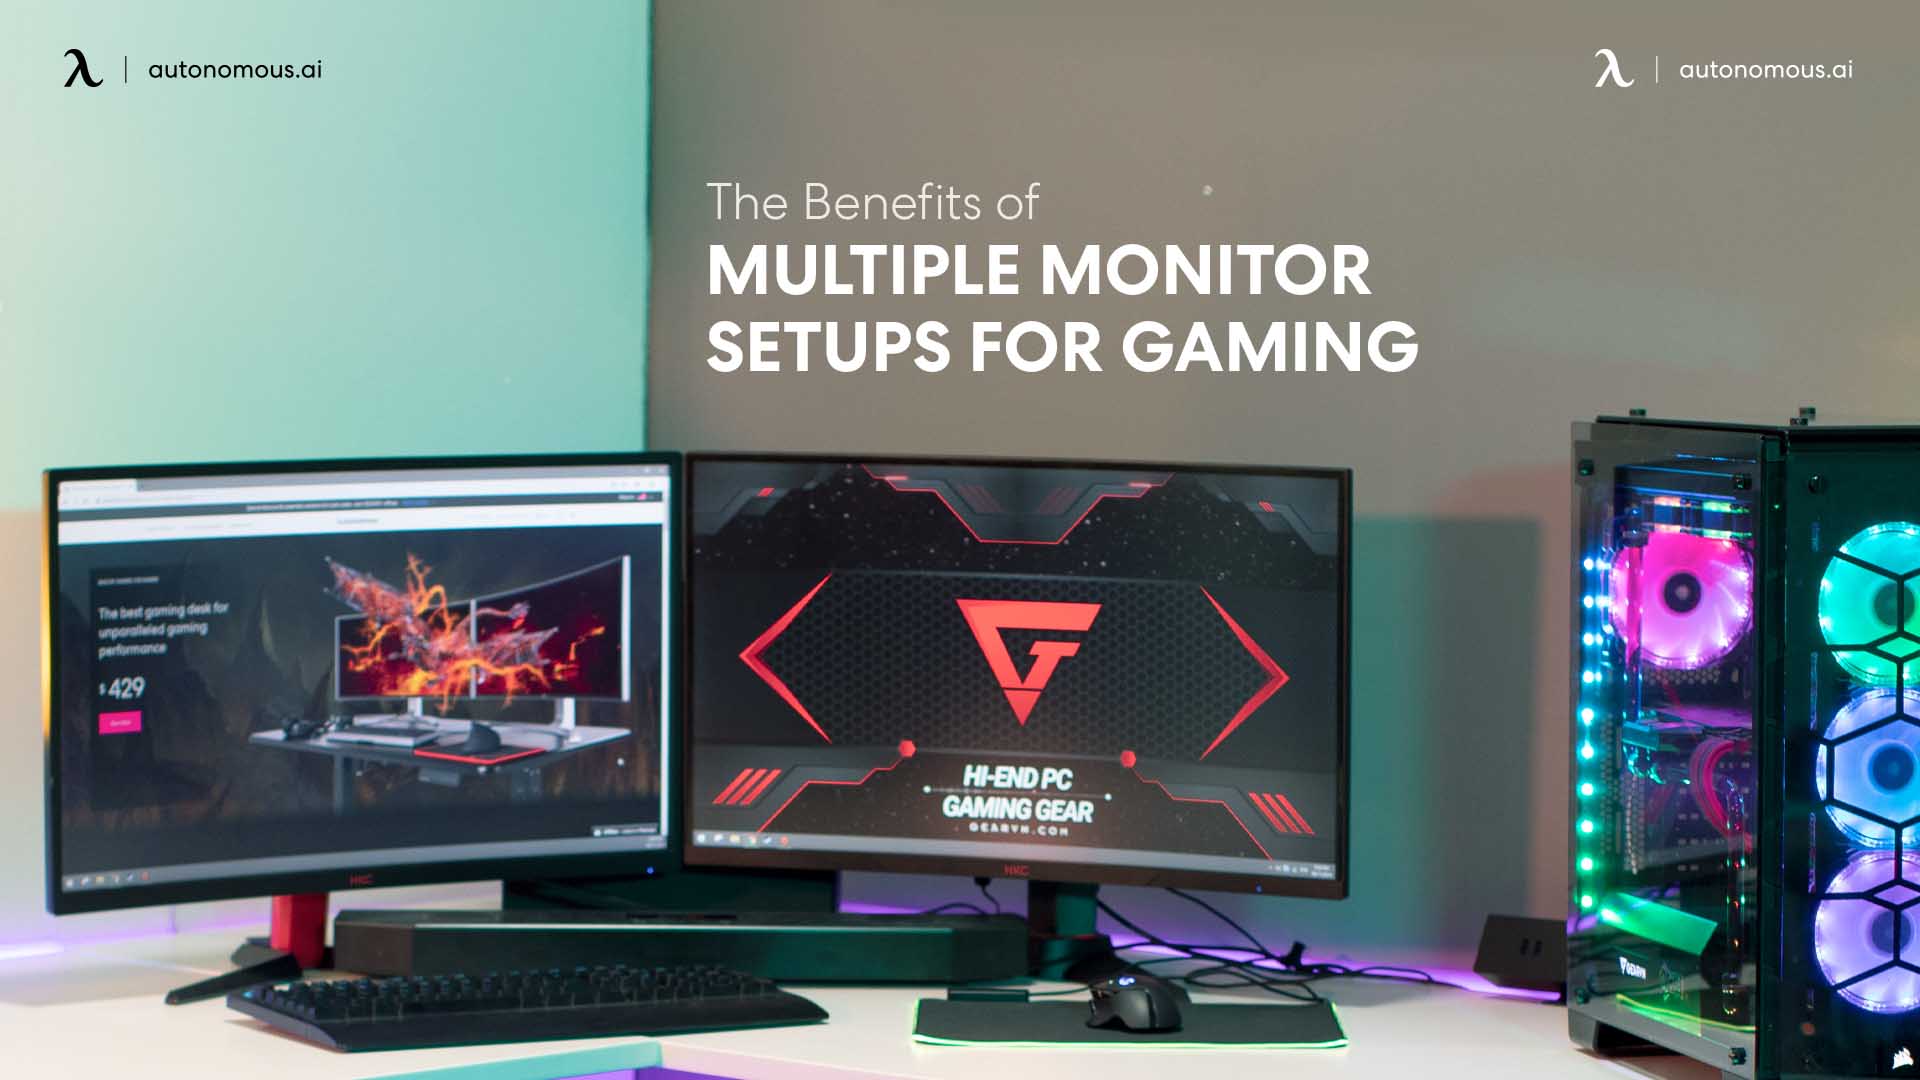 The Benefits of Multiple Monitor Setups for Gaming